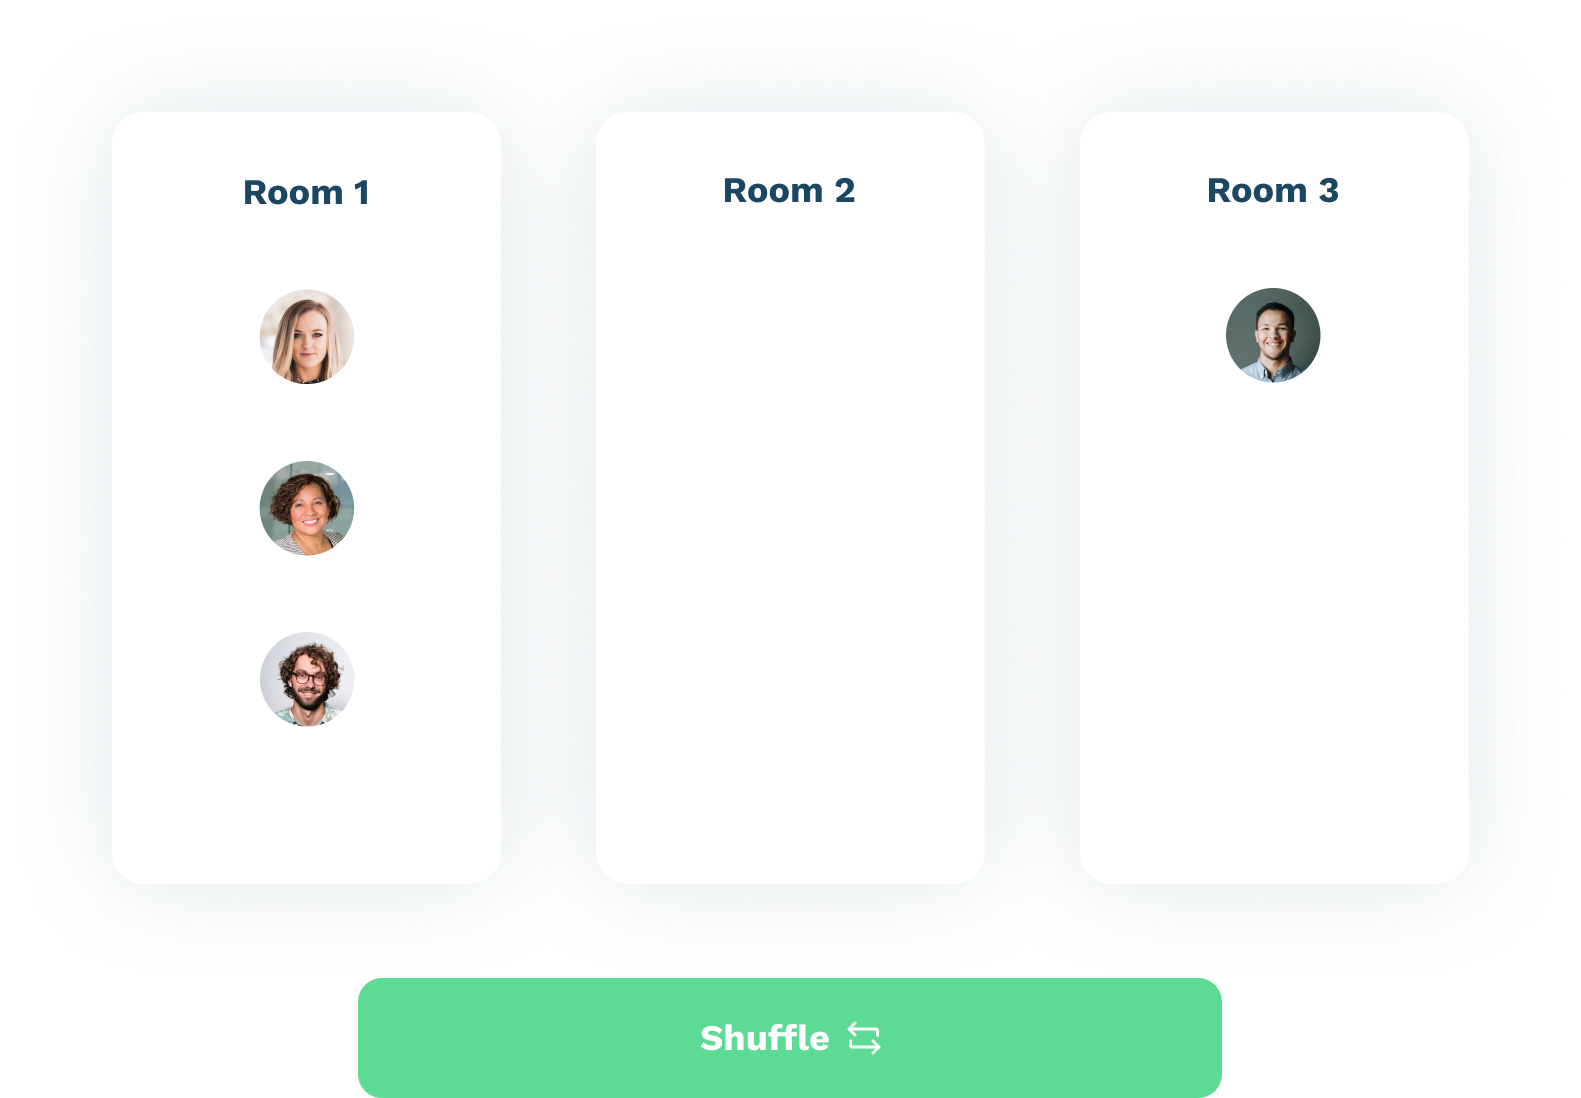 Shuffle attendees to rooms